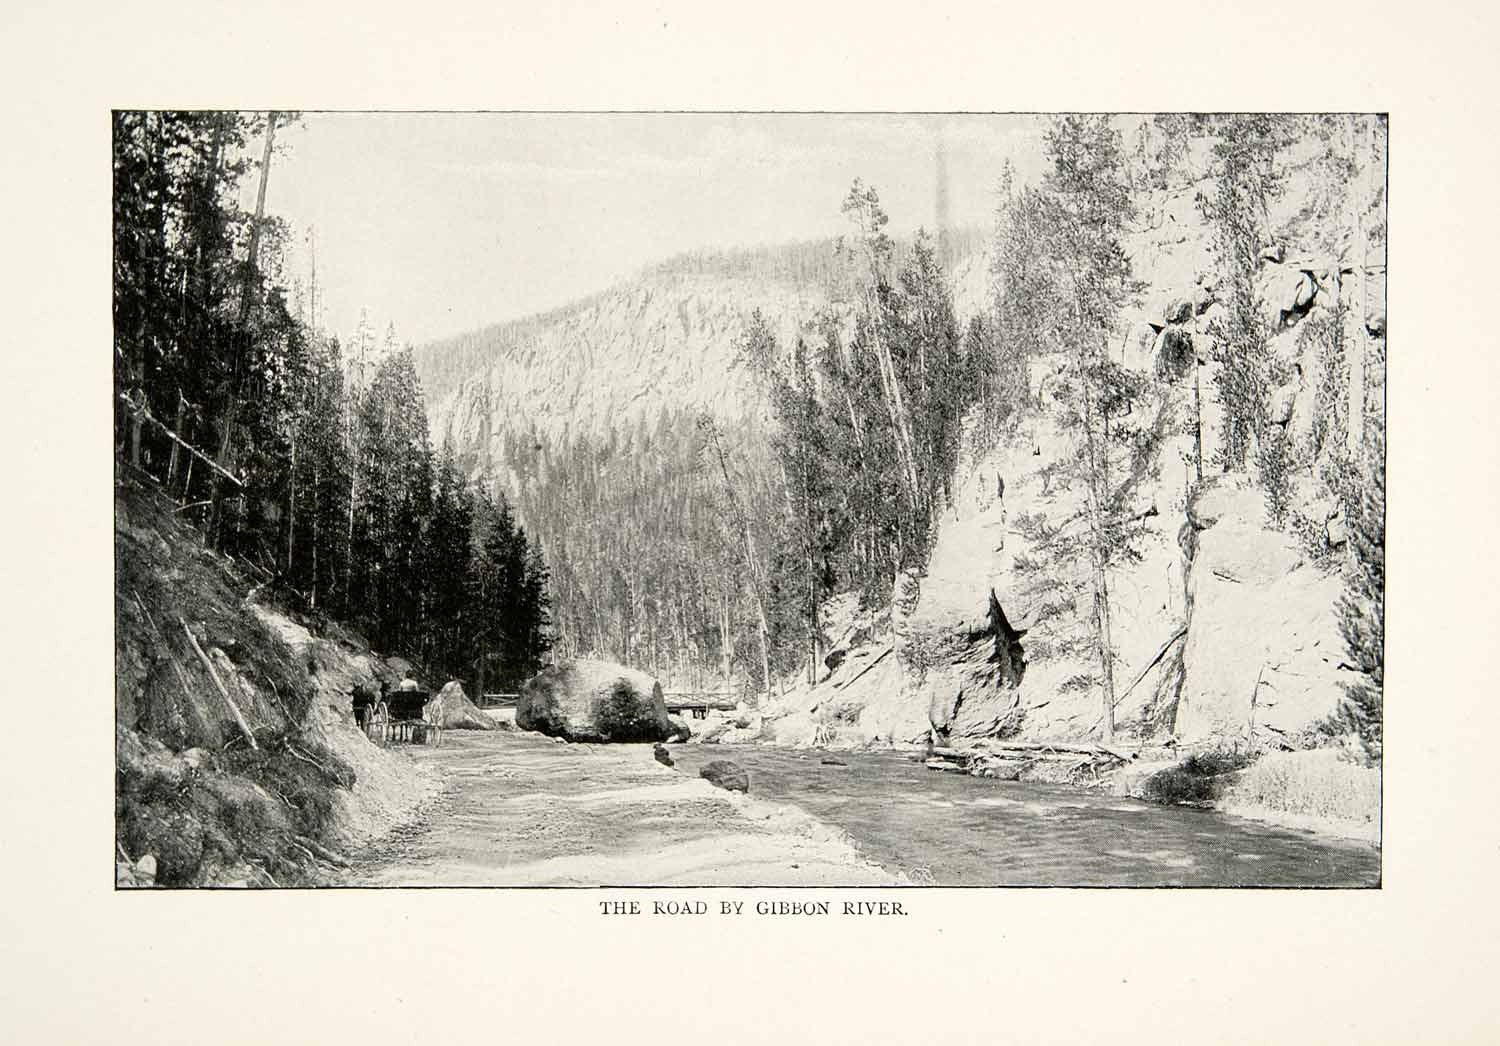 1902 Print Yellowstone National Park Gibbon River Road Street Paved XGNB6 - Period Paper
